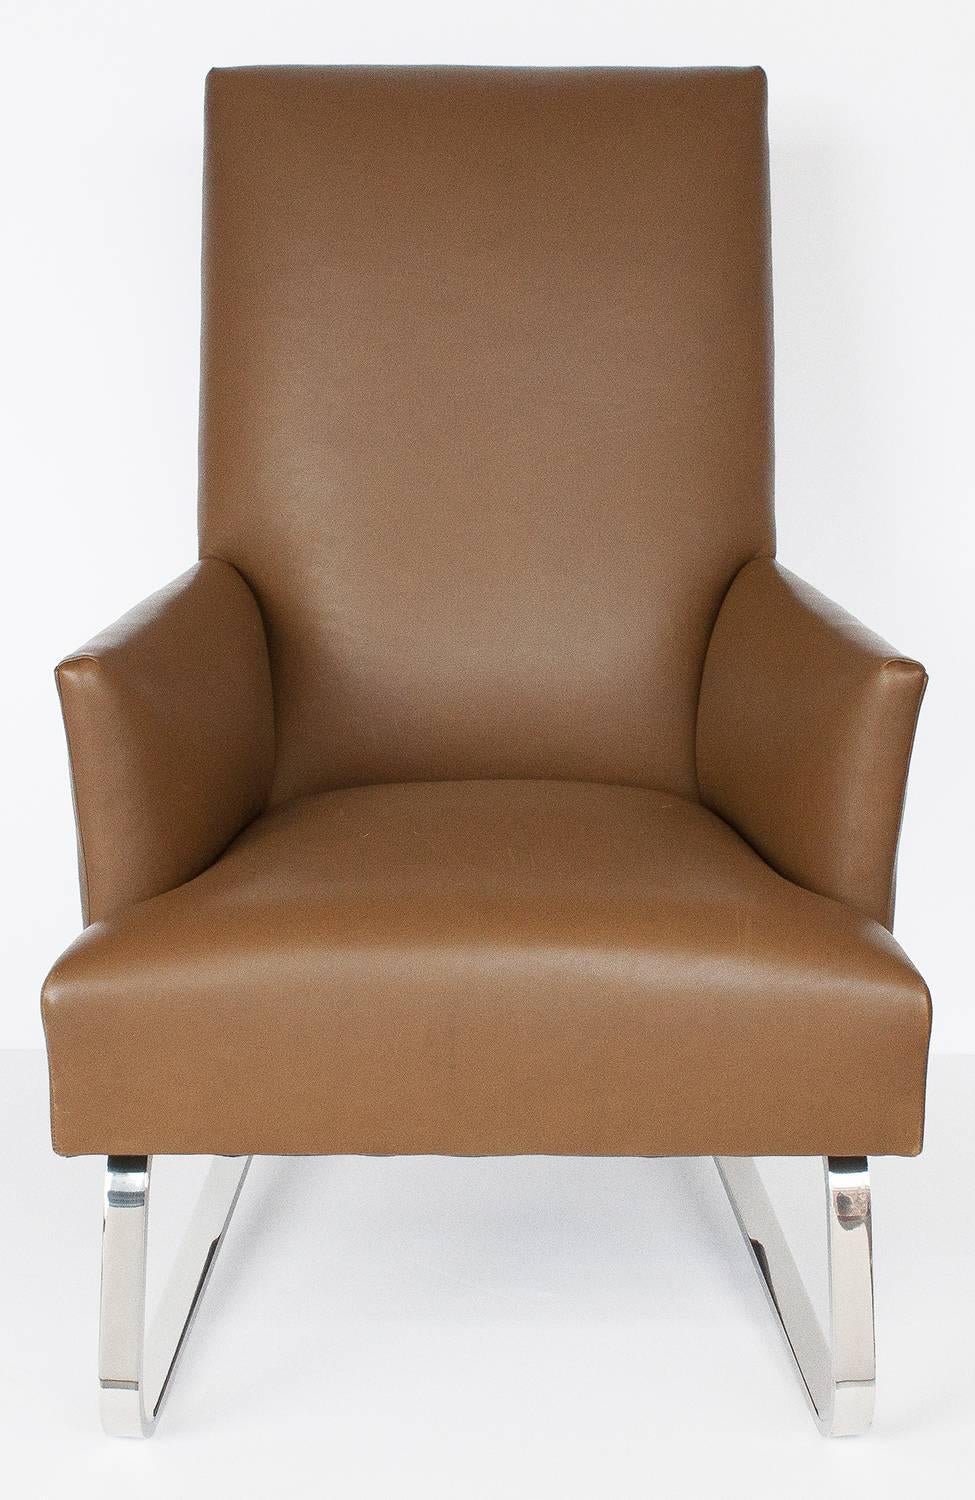 Plated Pair of Donghia Leather Odeon Lounge Chairs